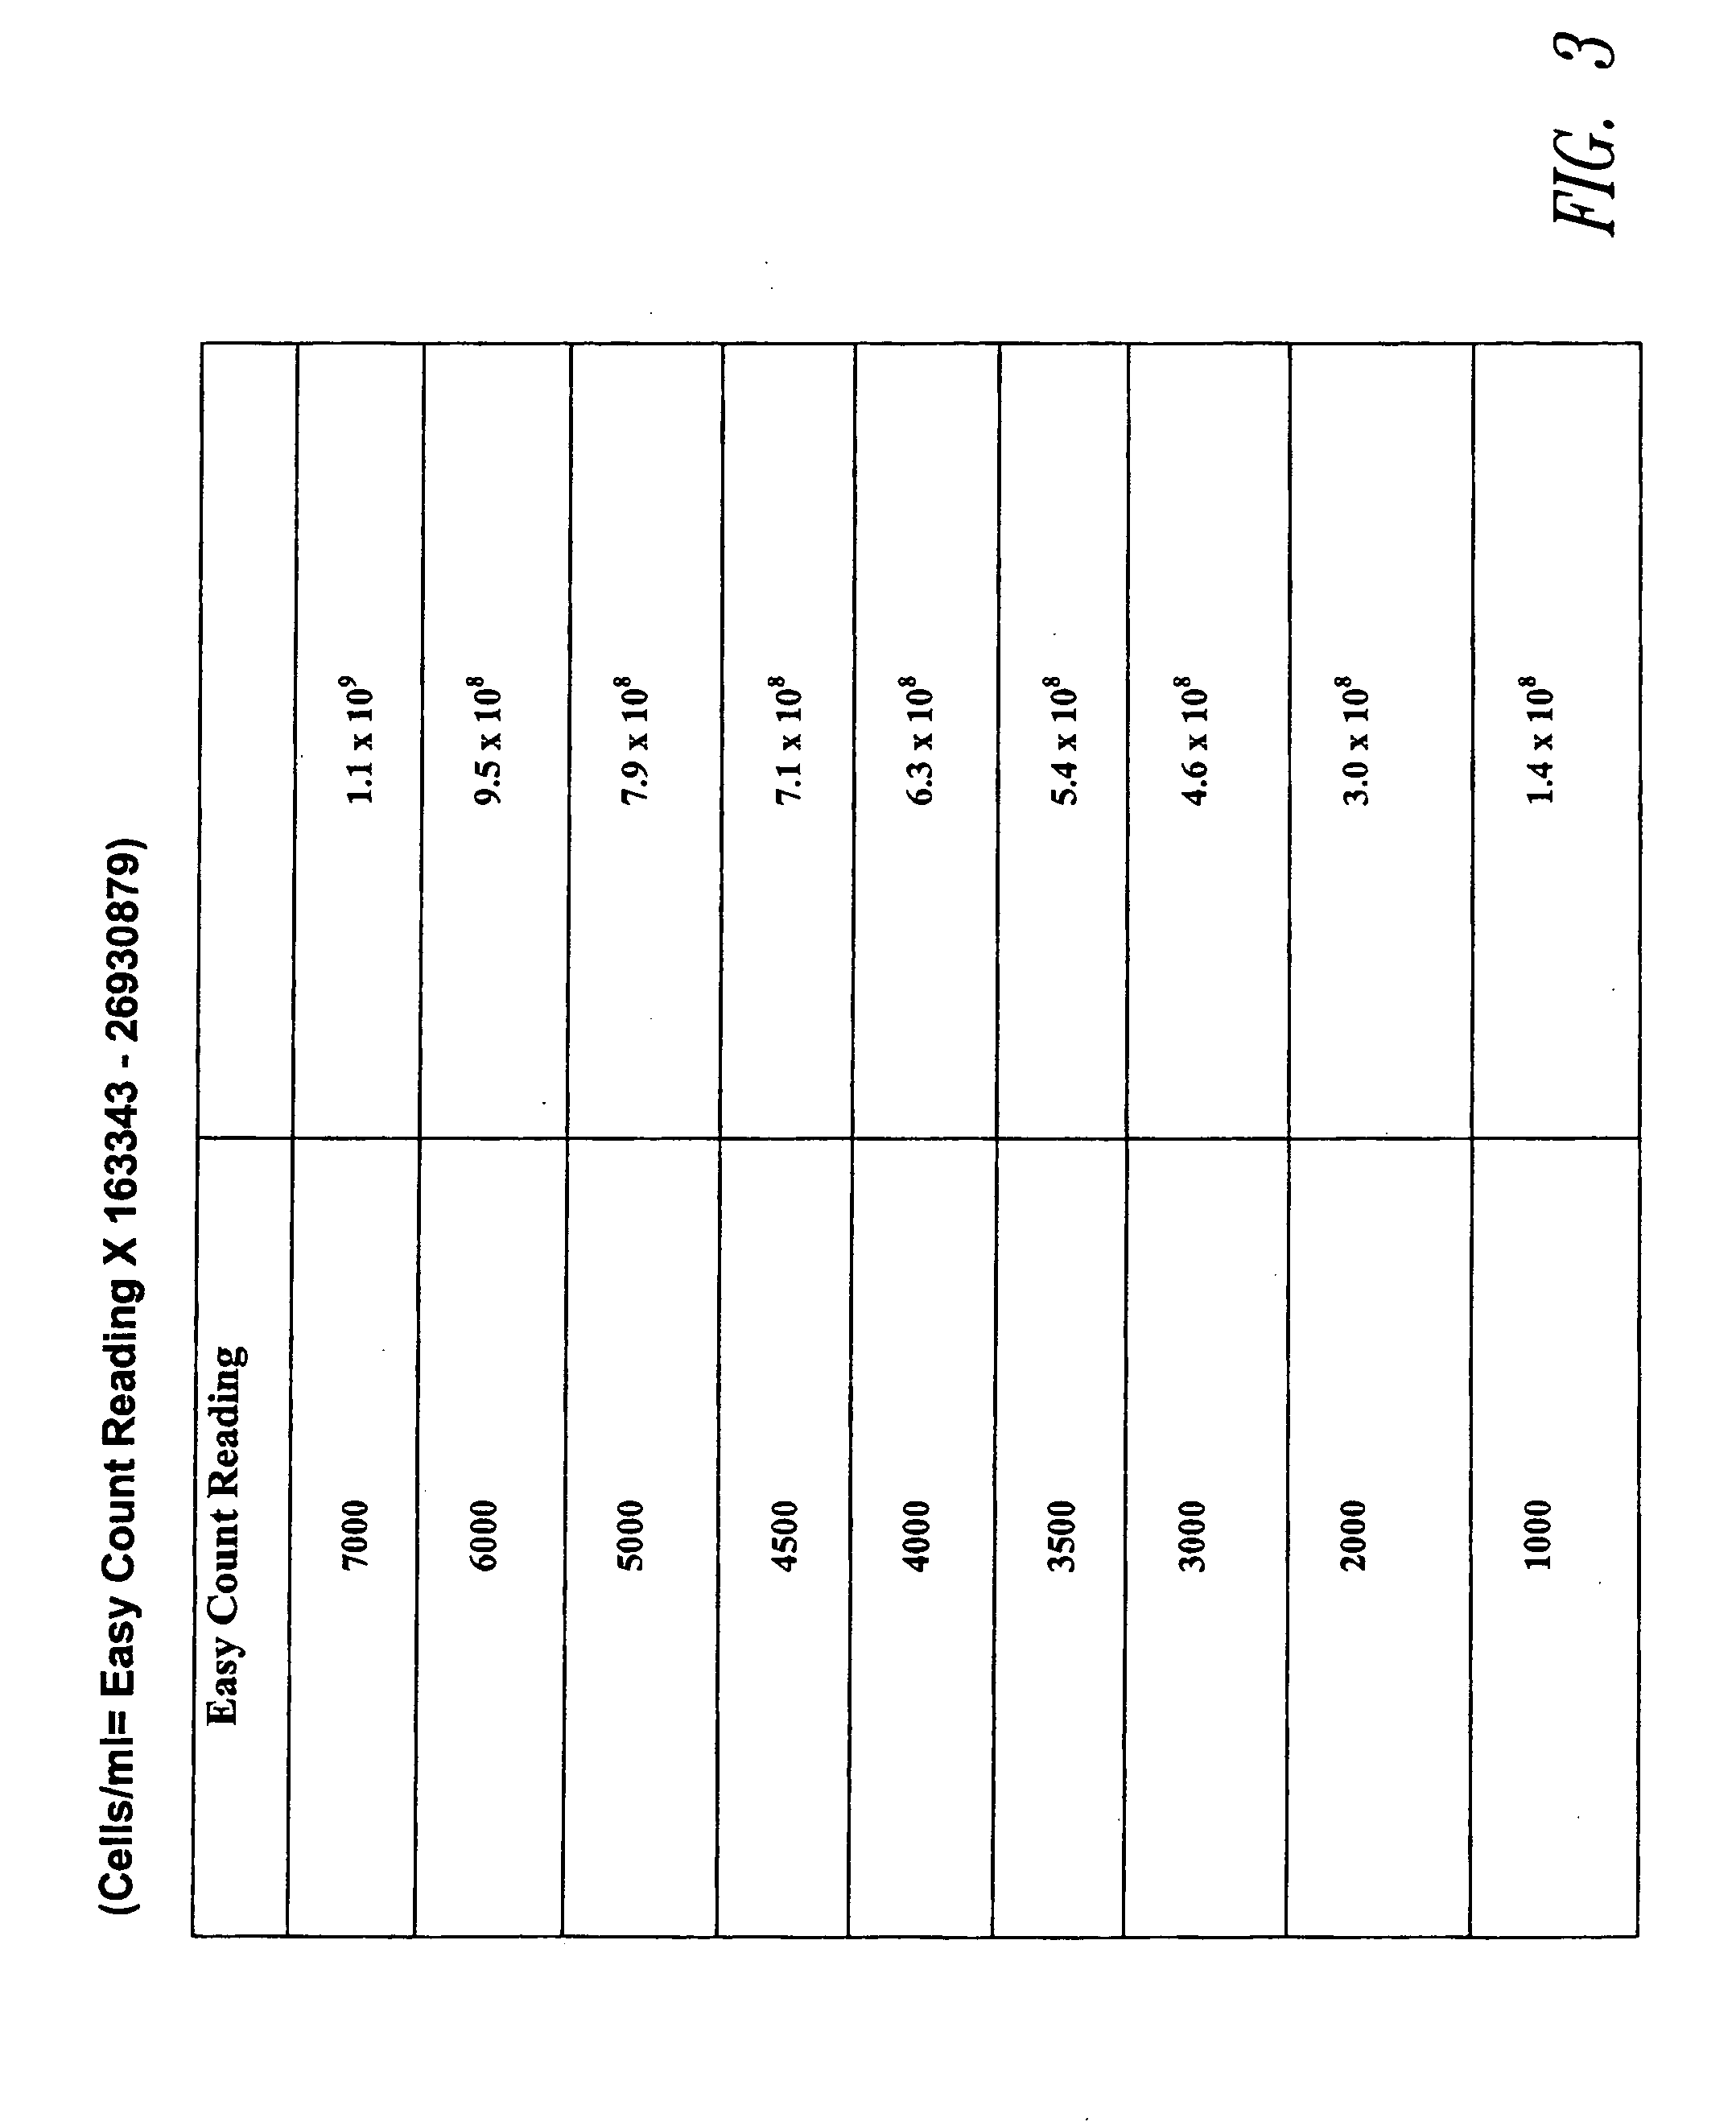 Method and apparatus for viable and nonviable prokaryotic and eukaryotic cell quantitation